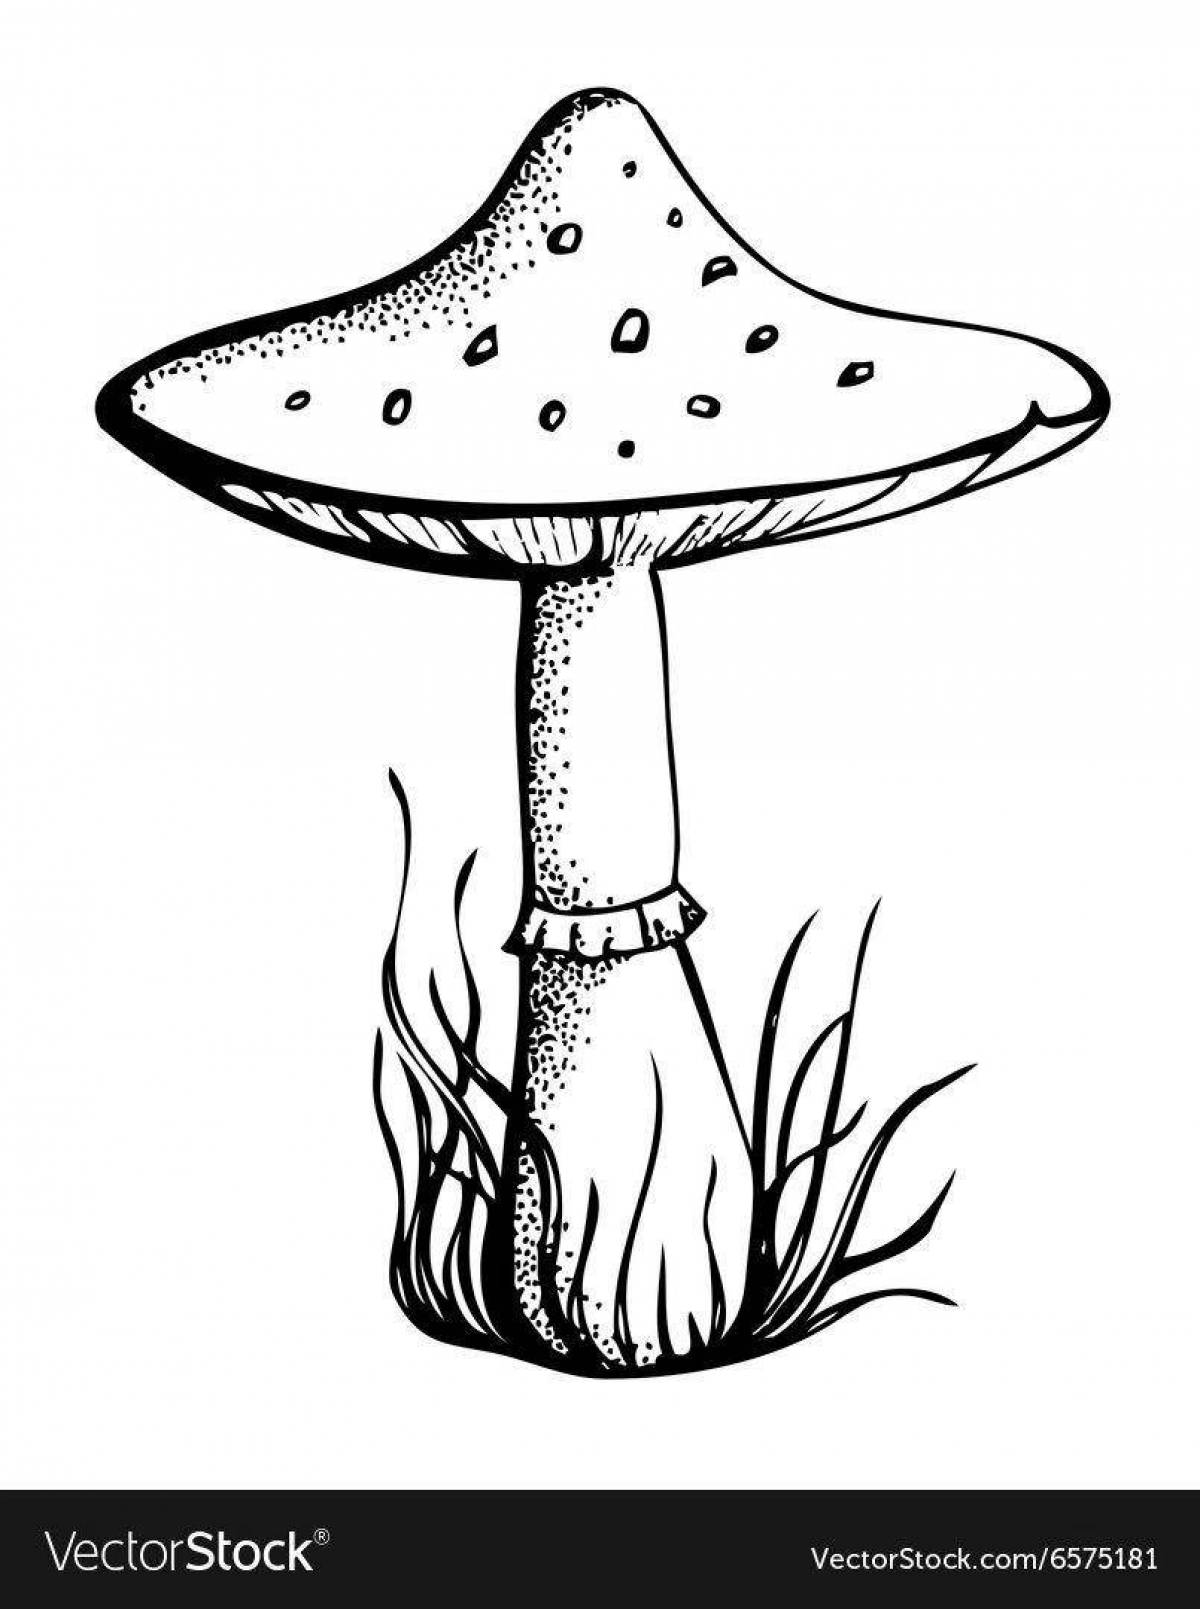 Coloring page adorable toadstool